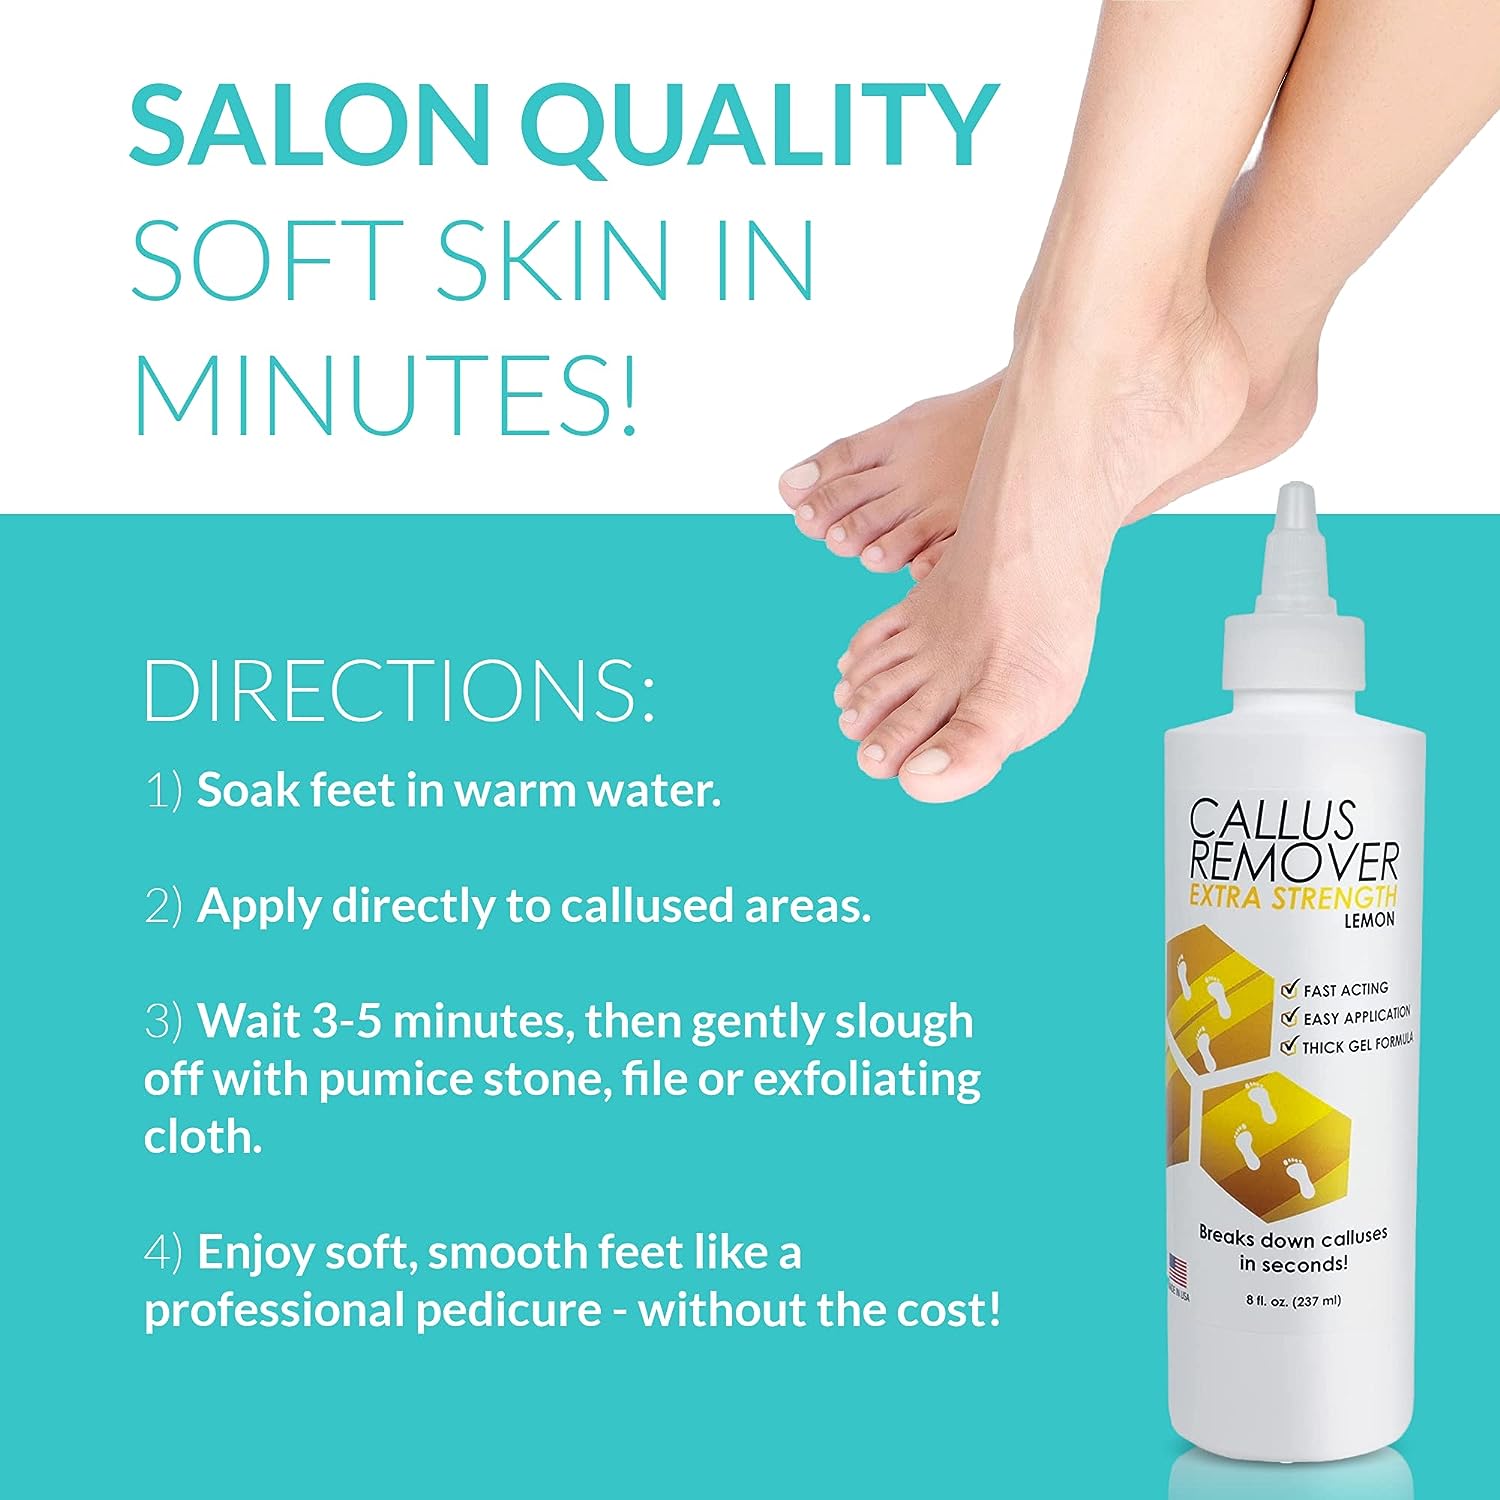 8oz Callus Remover gel for feet for a professional pedicure